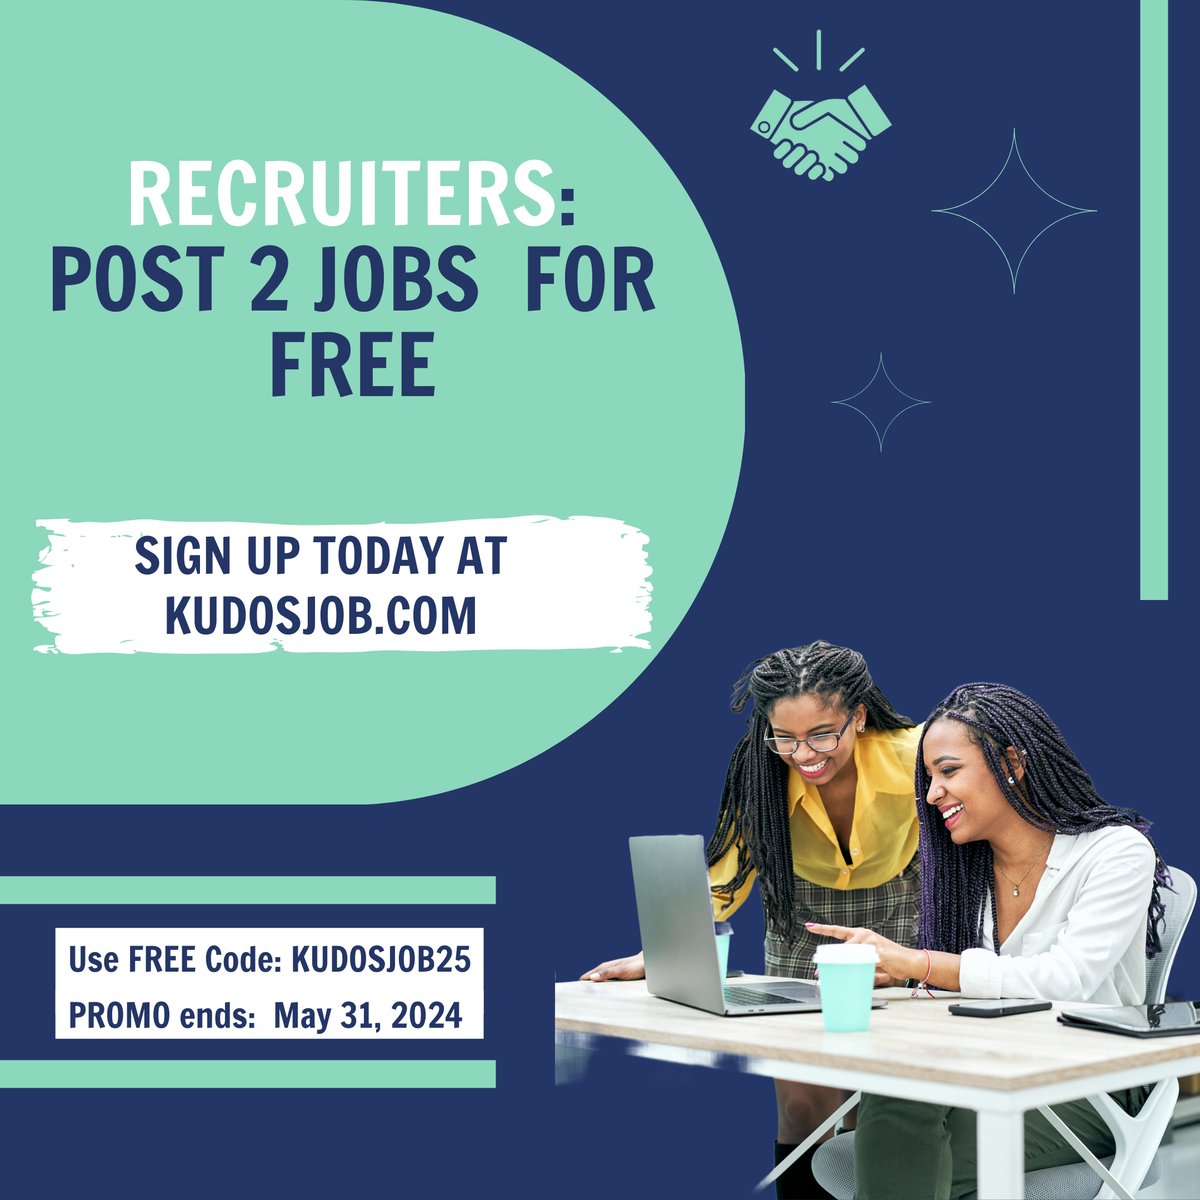 🌟 Optimize Your Hiring Strategy at kudosjob.com - Secure Your Offer Now! 

Act swiftly to enjoy our #LimitedTimeOffer: Get two job postings free with the code kudosjob25! 🎉

👉 Book your demo today: social.kudosjob.com/35x64

#ExclusiveOffer #EffortlessRecruiting